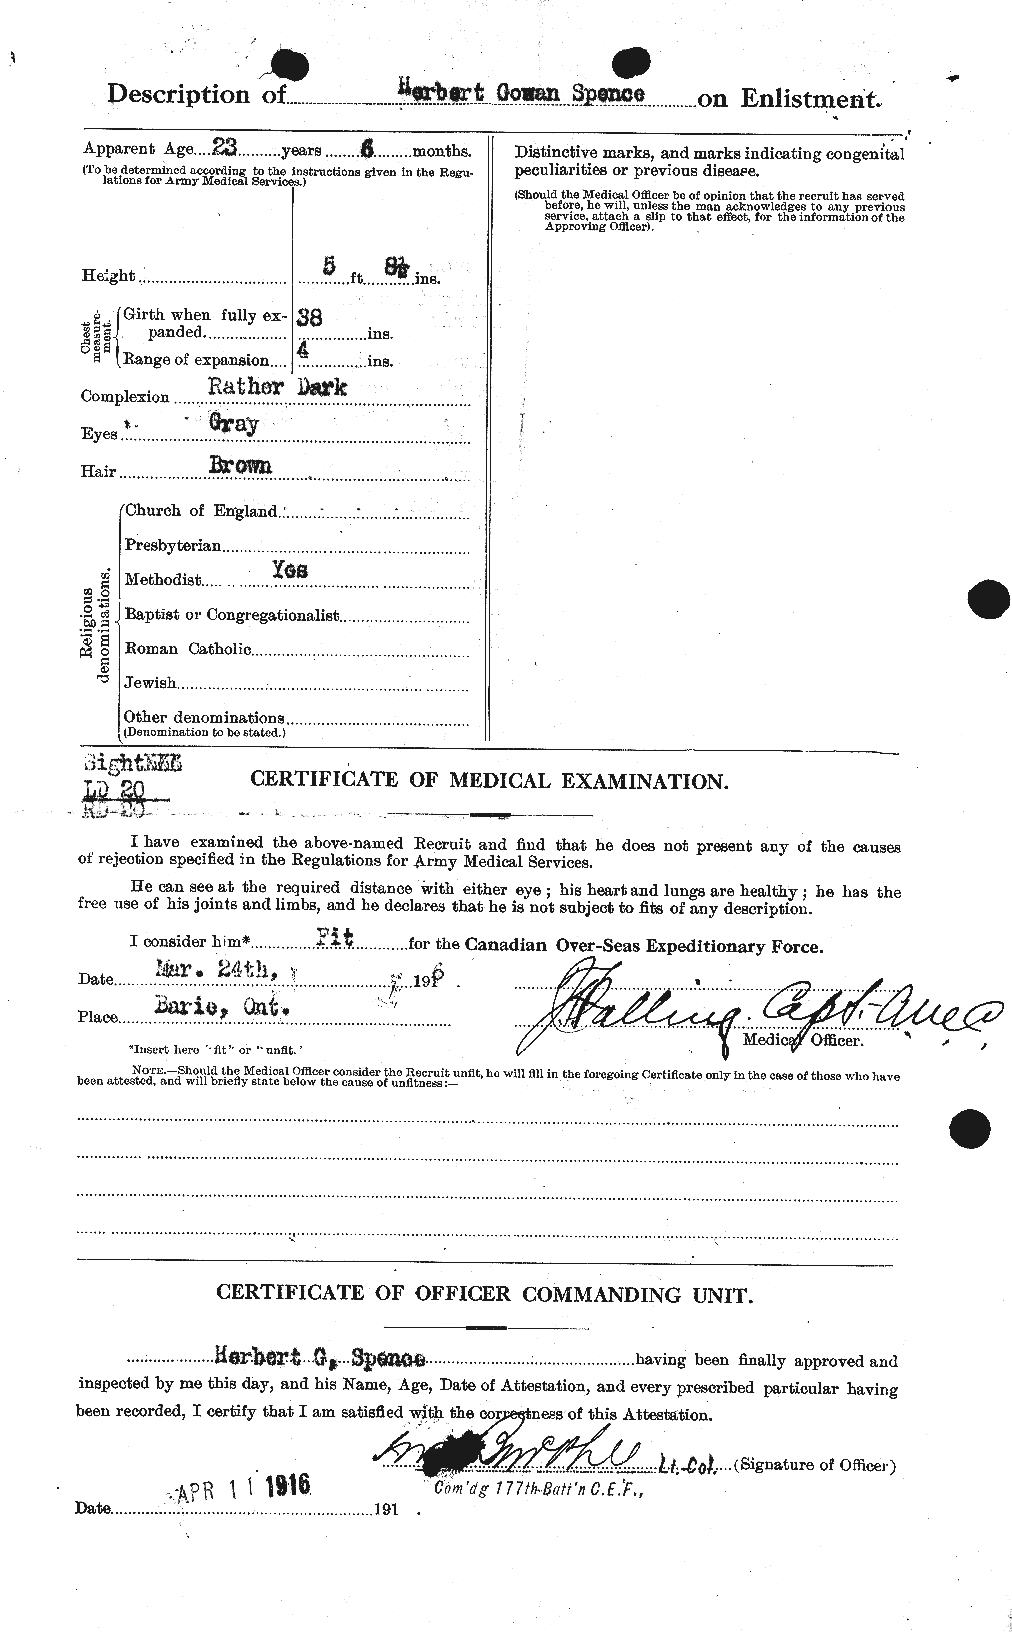 Personnel Records of the First World War - CEF 621338b